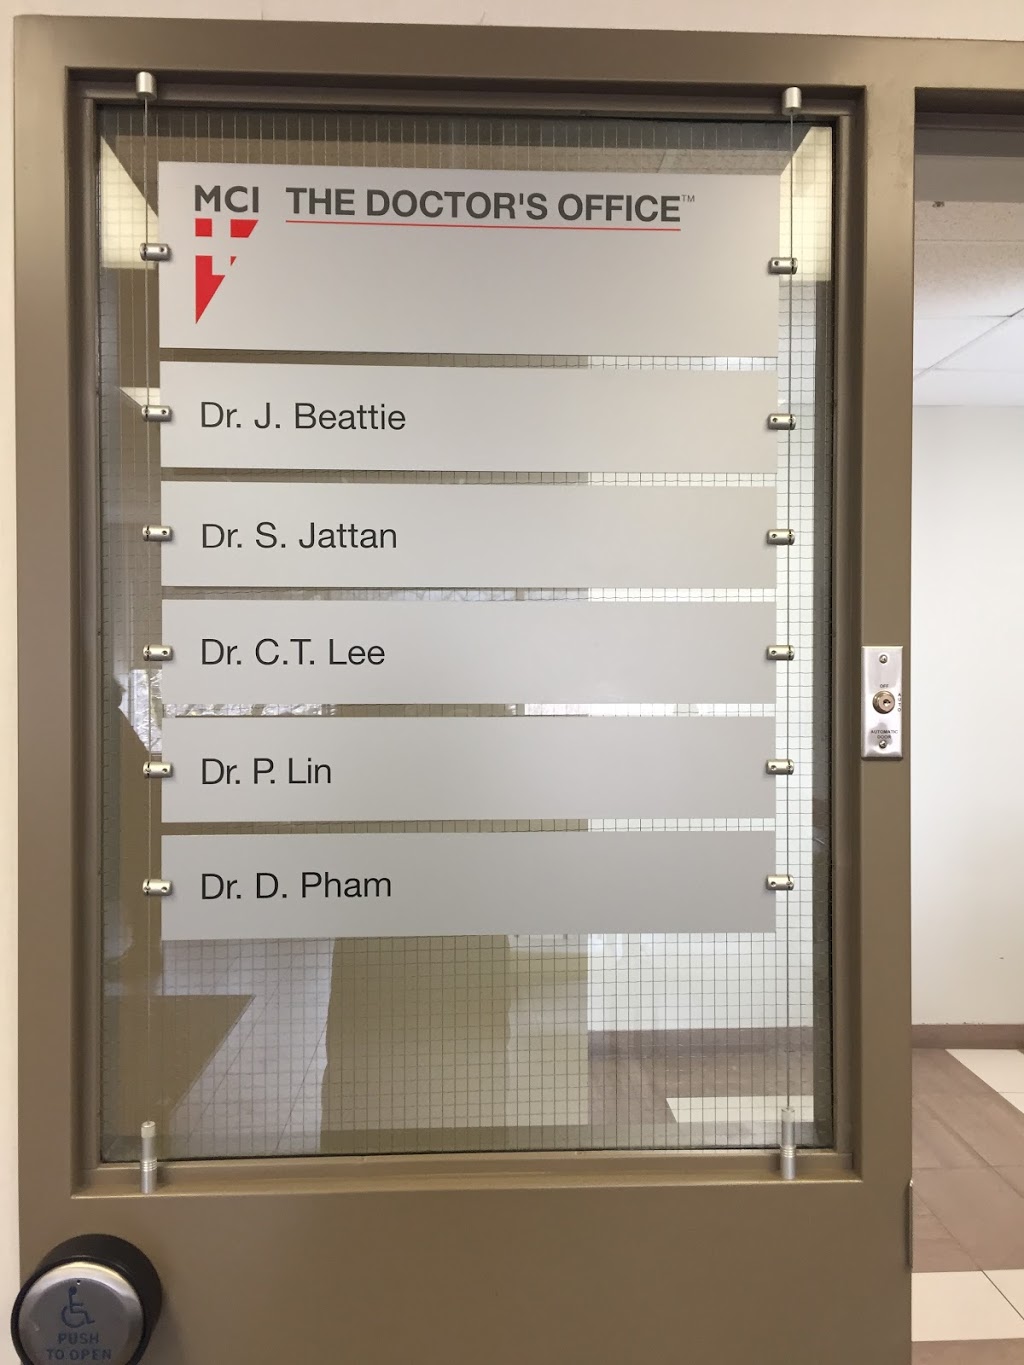 MCI The Doctors Office Birchmount | health | 3609 Sheppard Ave E #202, Scarborough, ON M1T 3K8, Canada | 4163212643 OR +1 416-321-2643